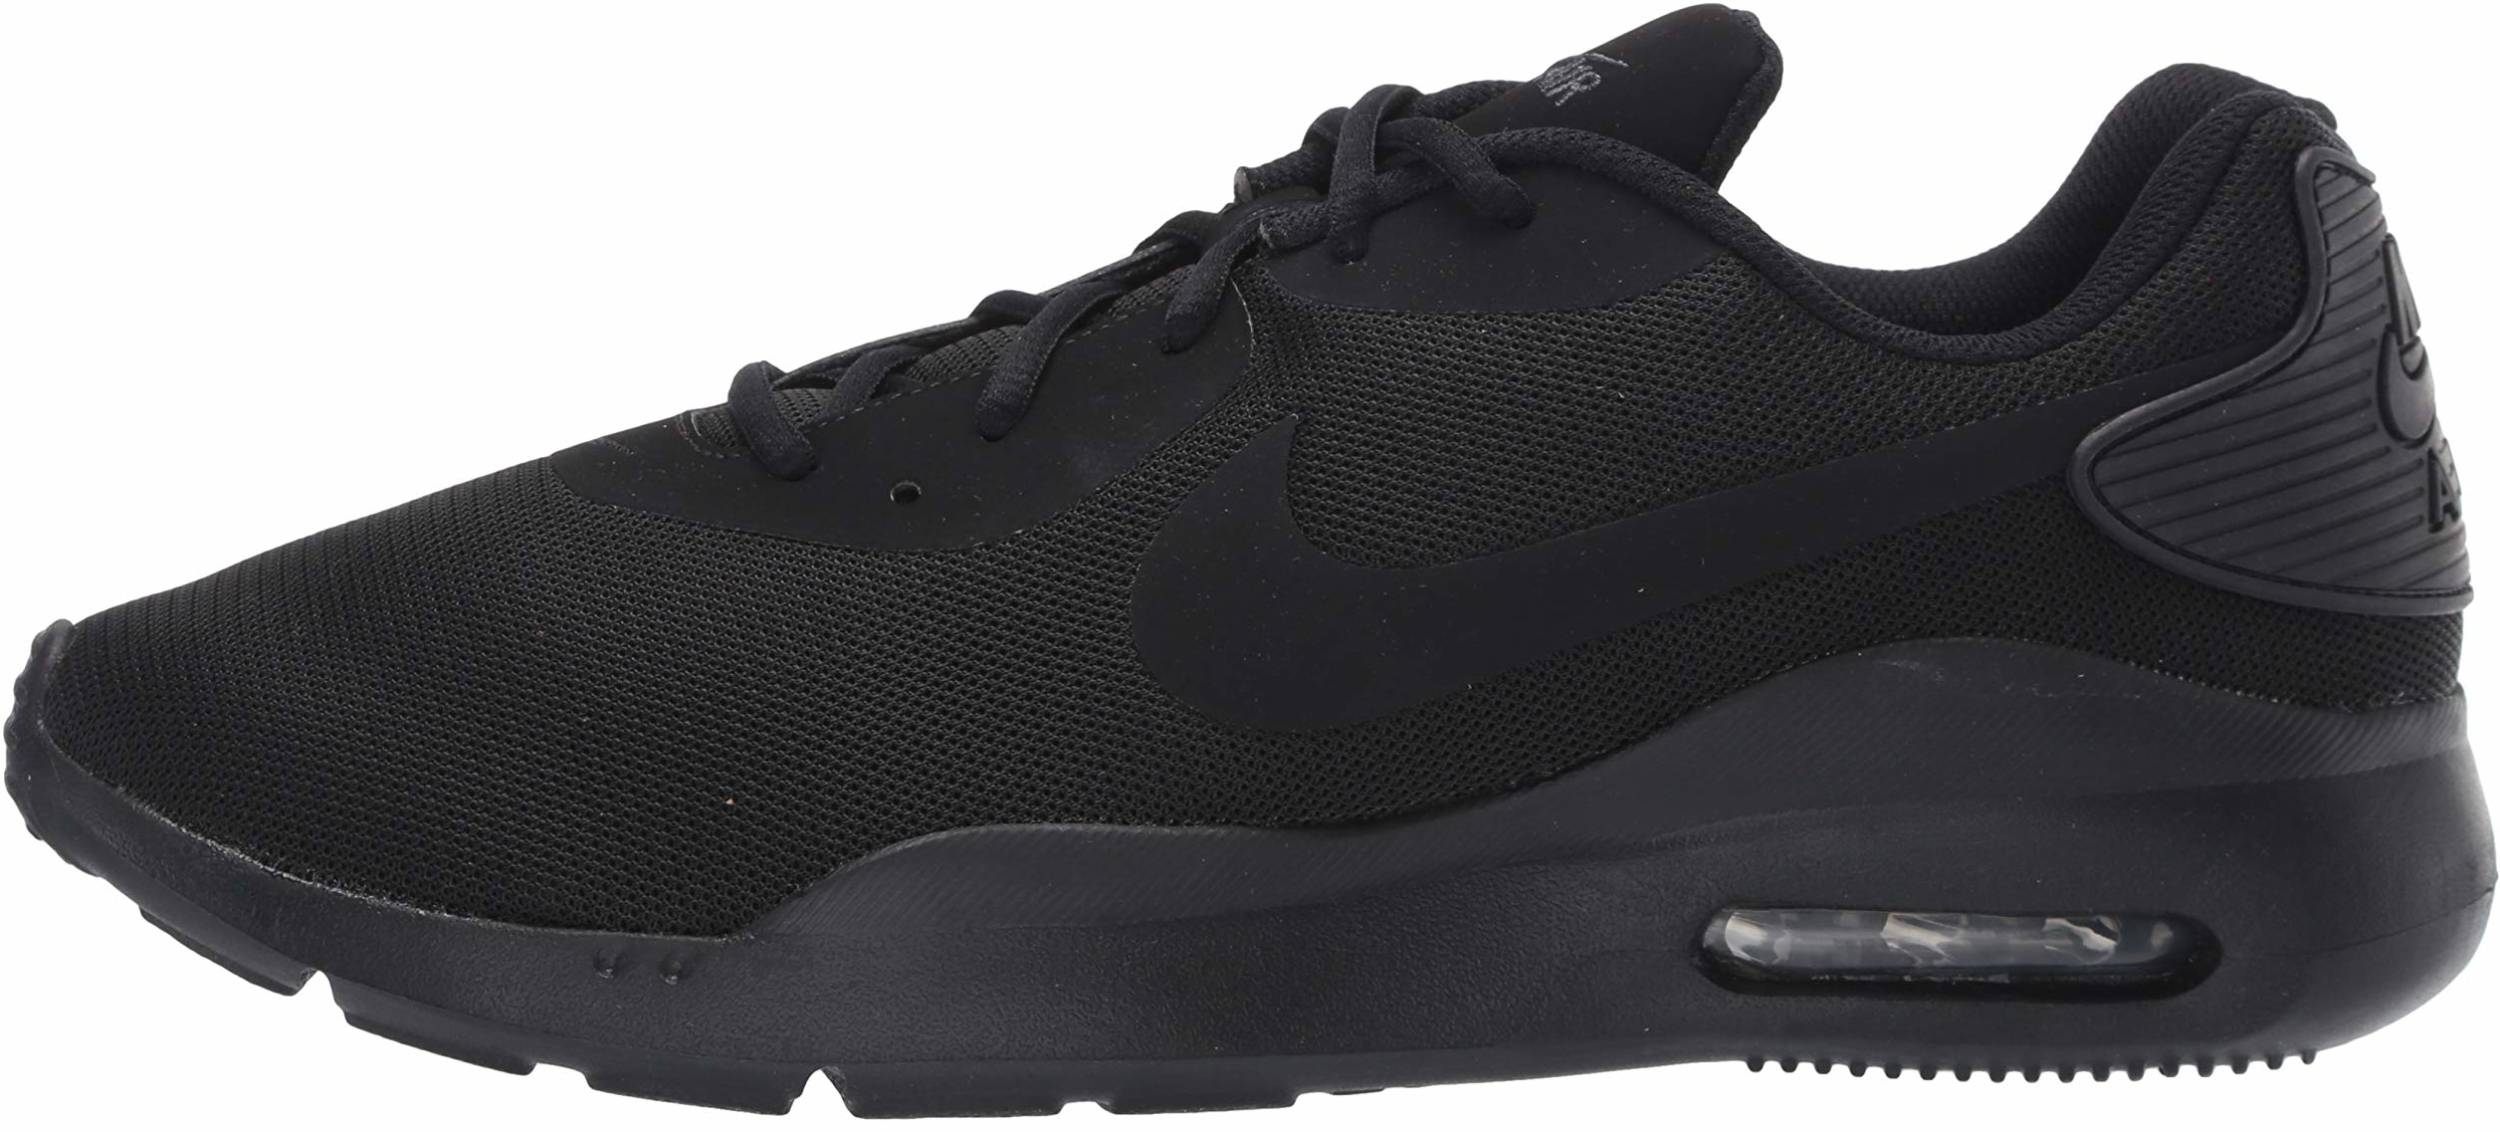 Only £47 + Review of Nike Air Max Oketo 